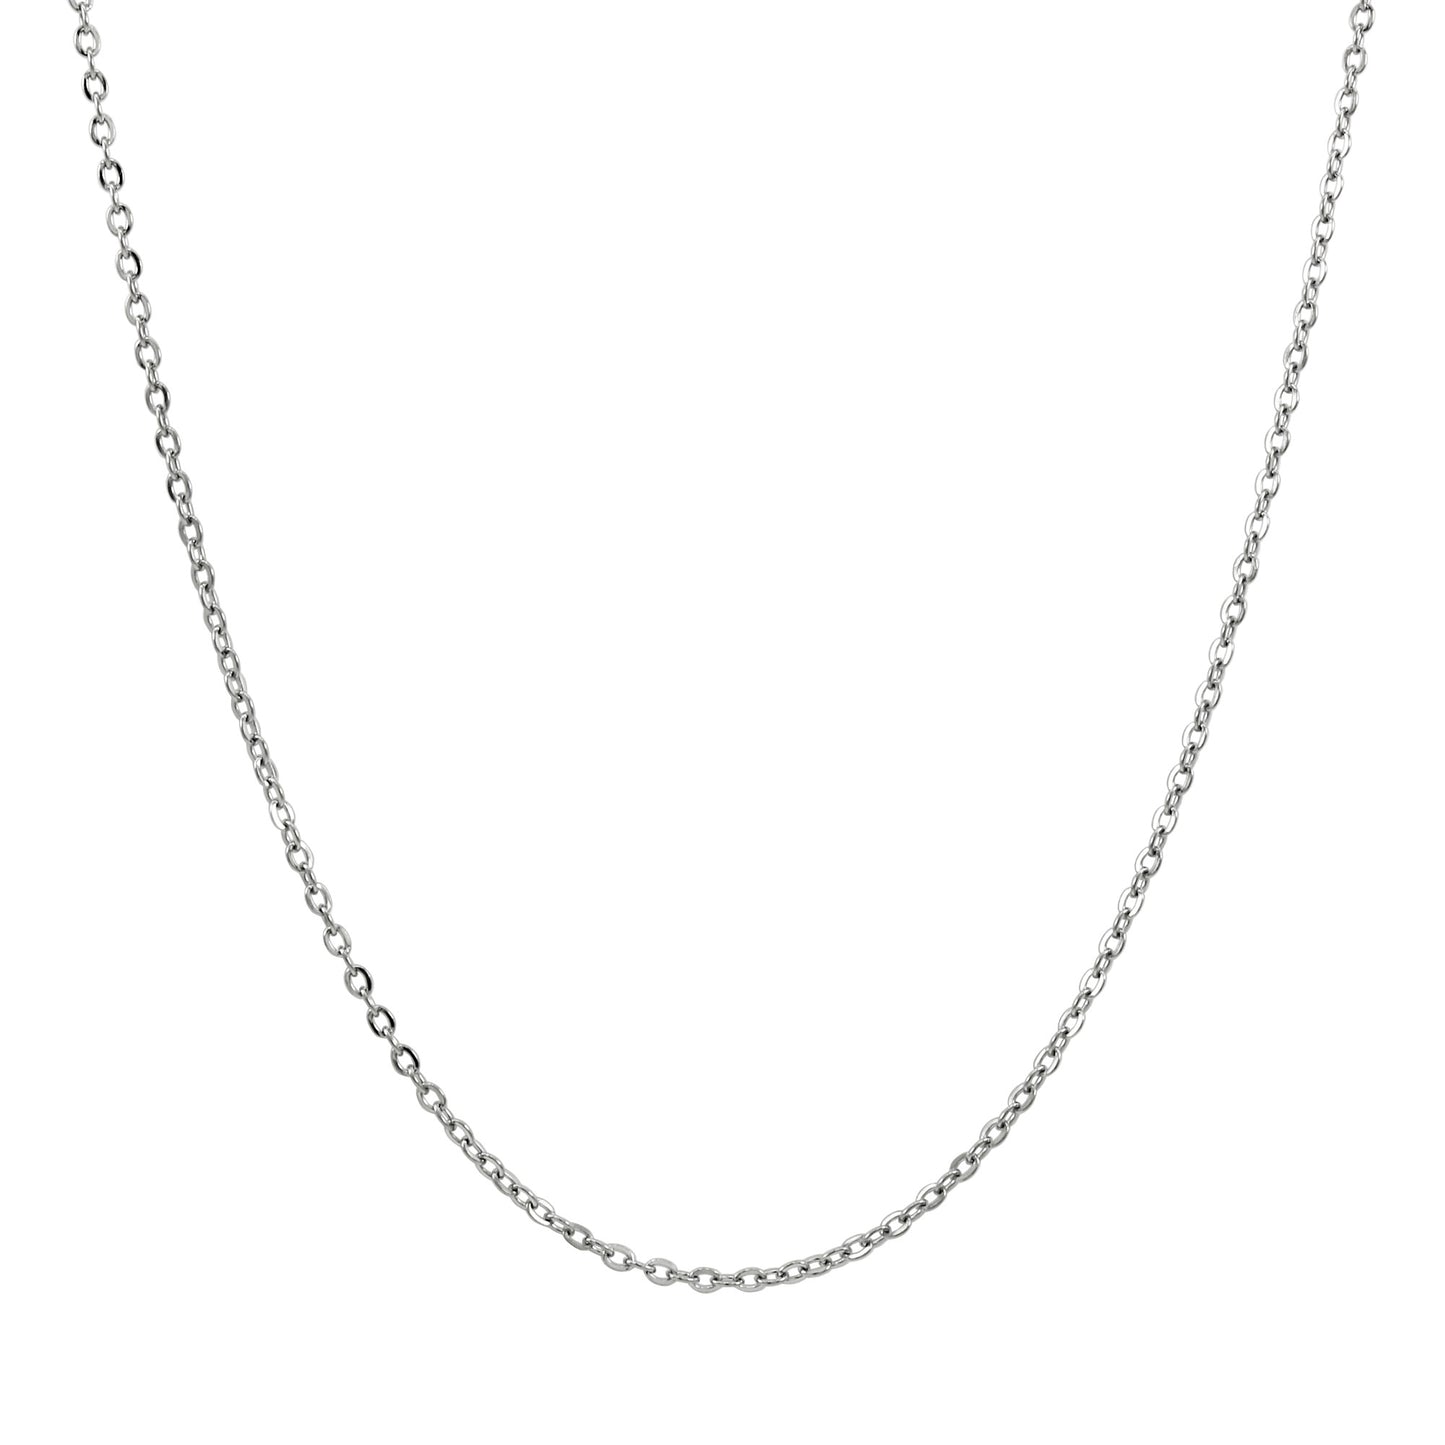 925 Sterling Silver Circular Nugget Textured Slide Pendant With 22" Hypoallergenic Cable Chain Necklace